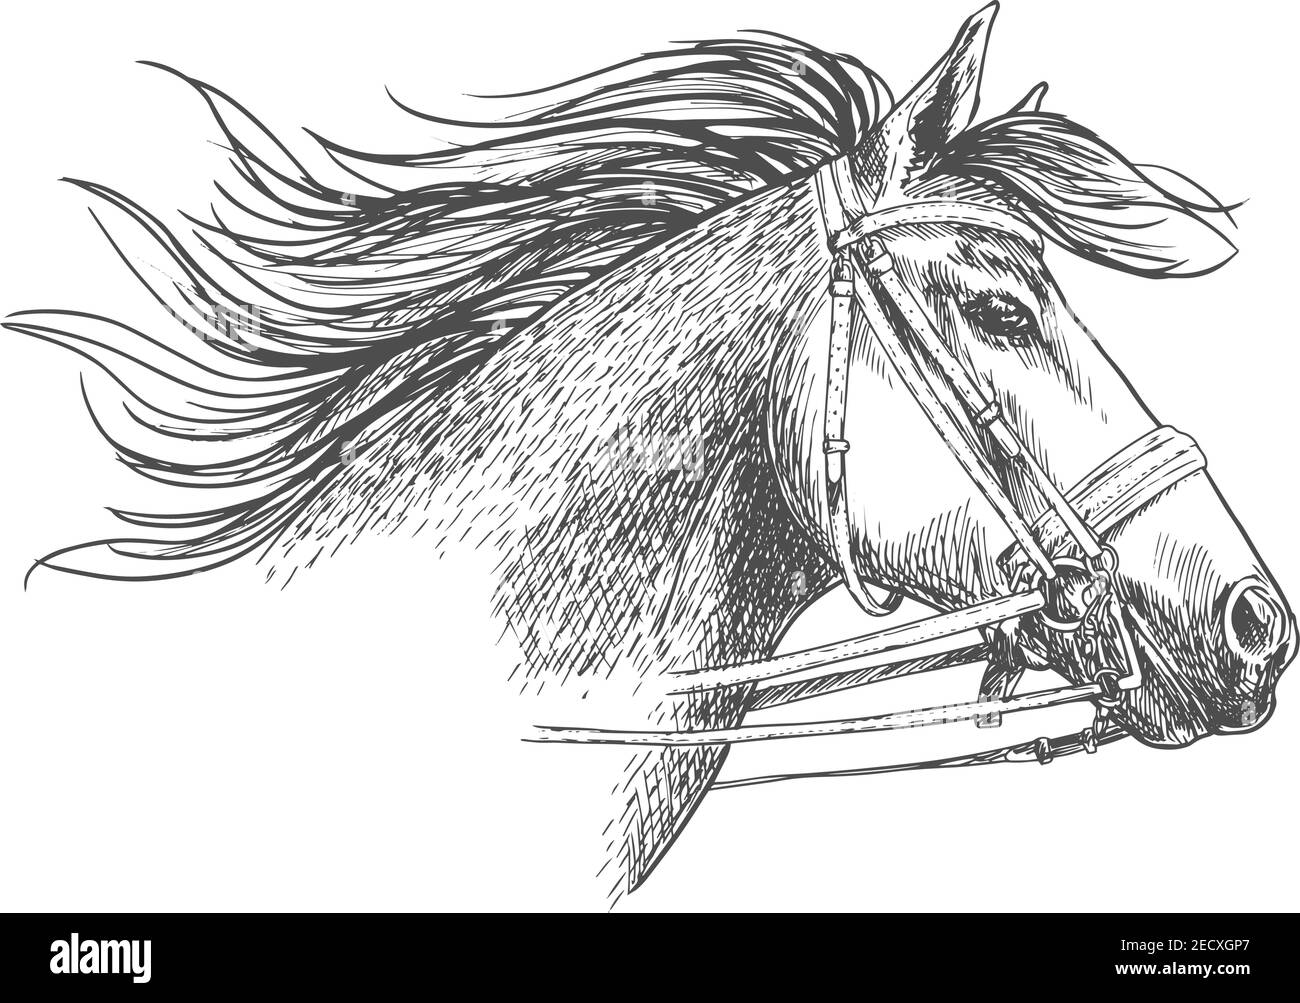 Horse head in a bridle with bit and reins sketch. Running arabian racehorse with flowing mane for horse racing symbol, equestrian sporting competition Stock Vector